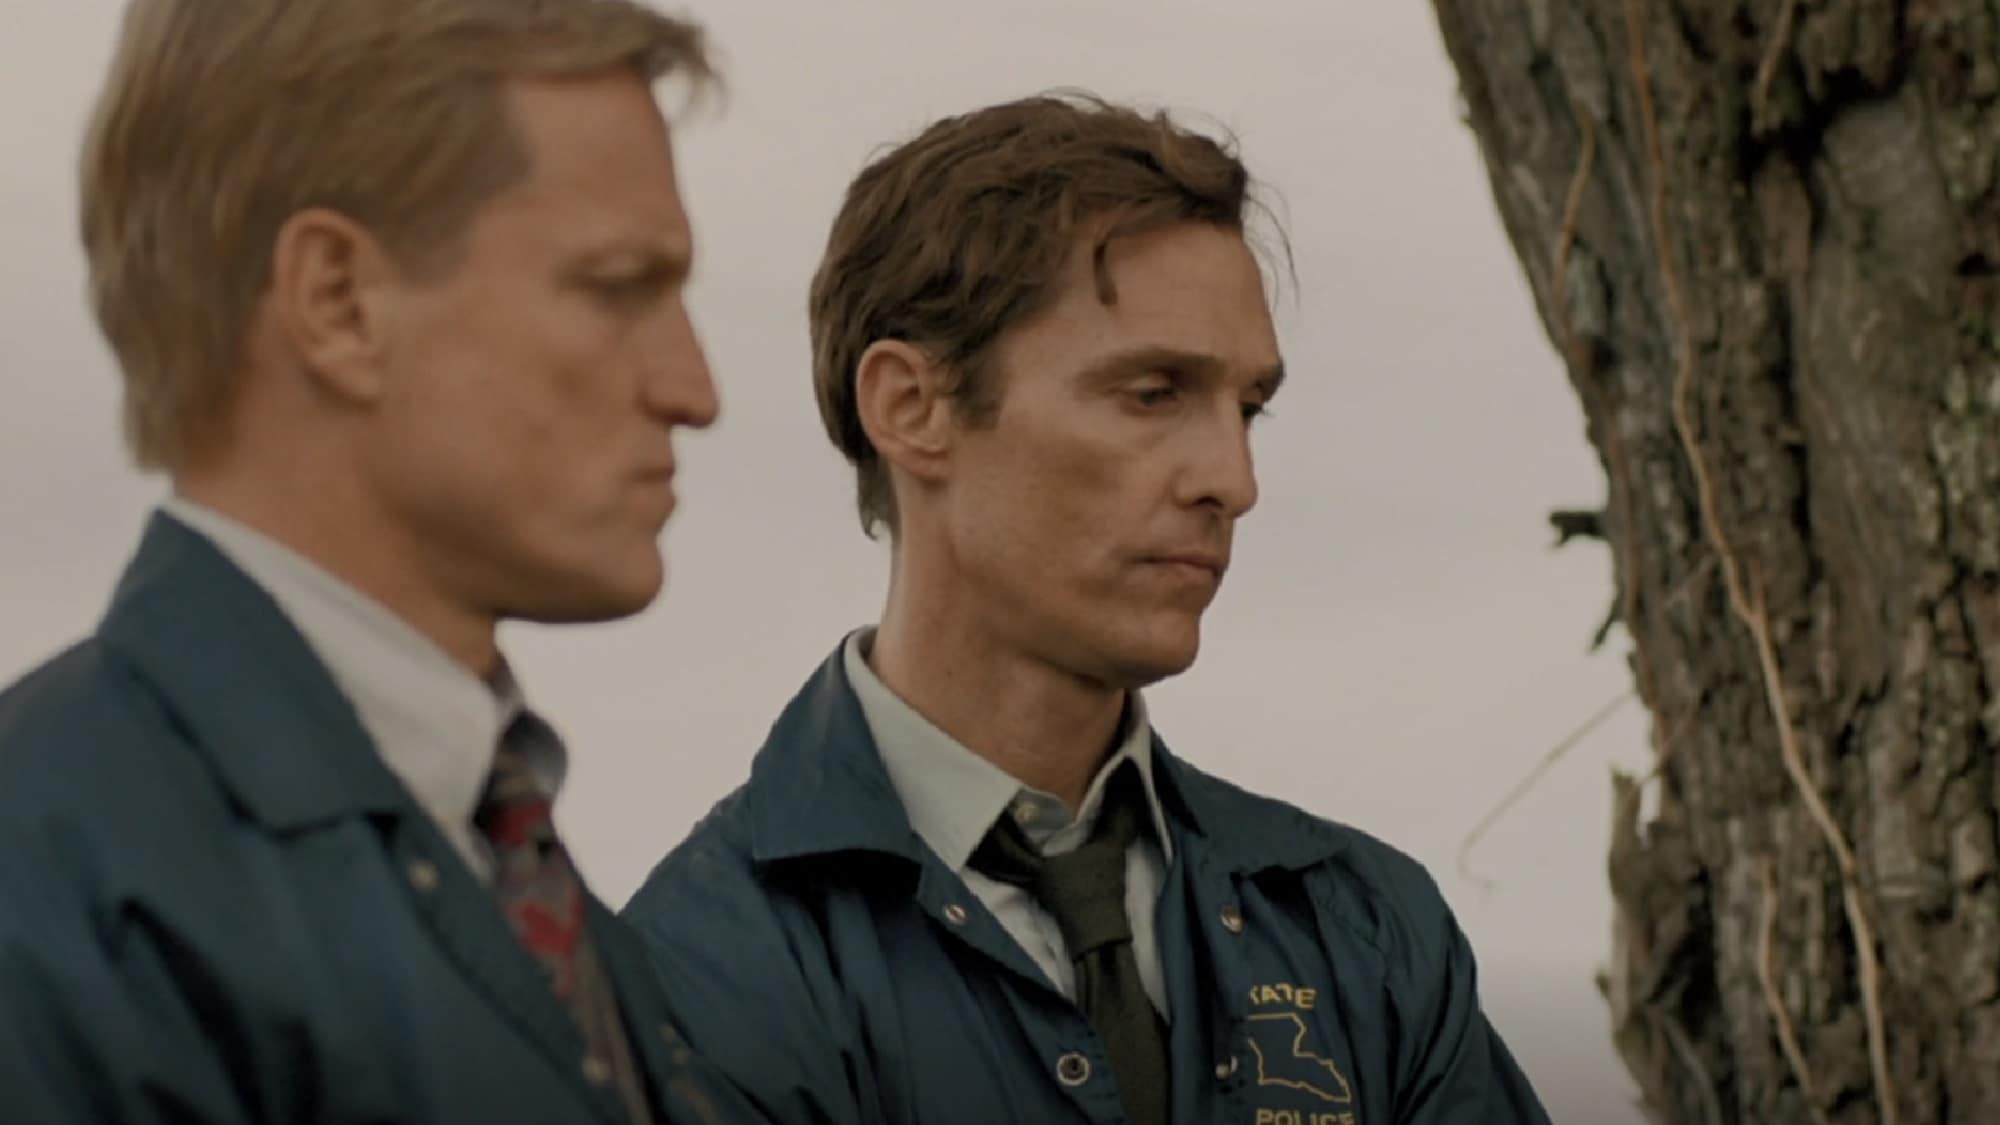 Rust cohle marty фото 9